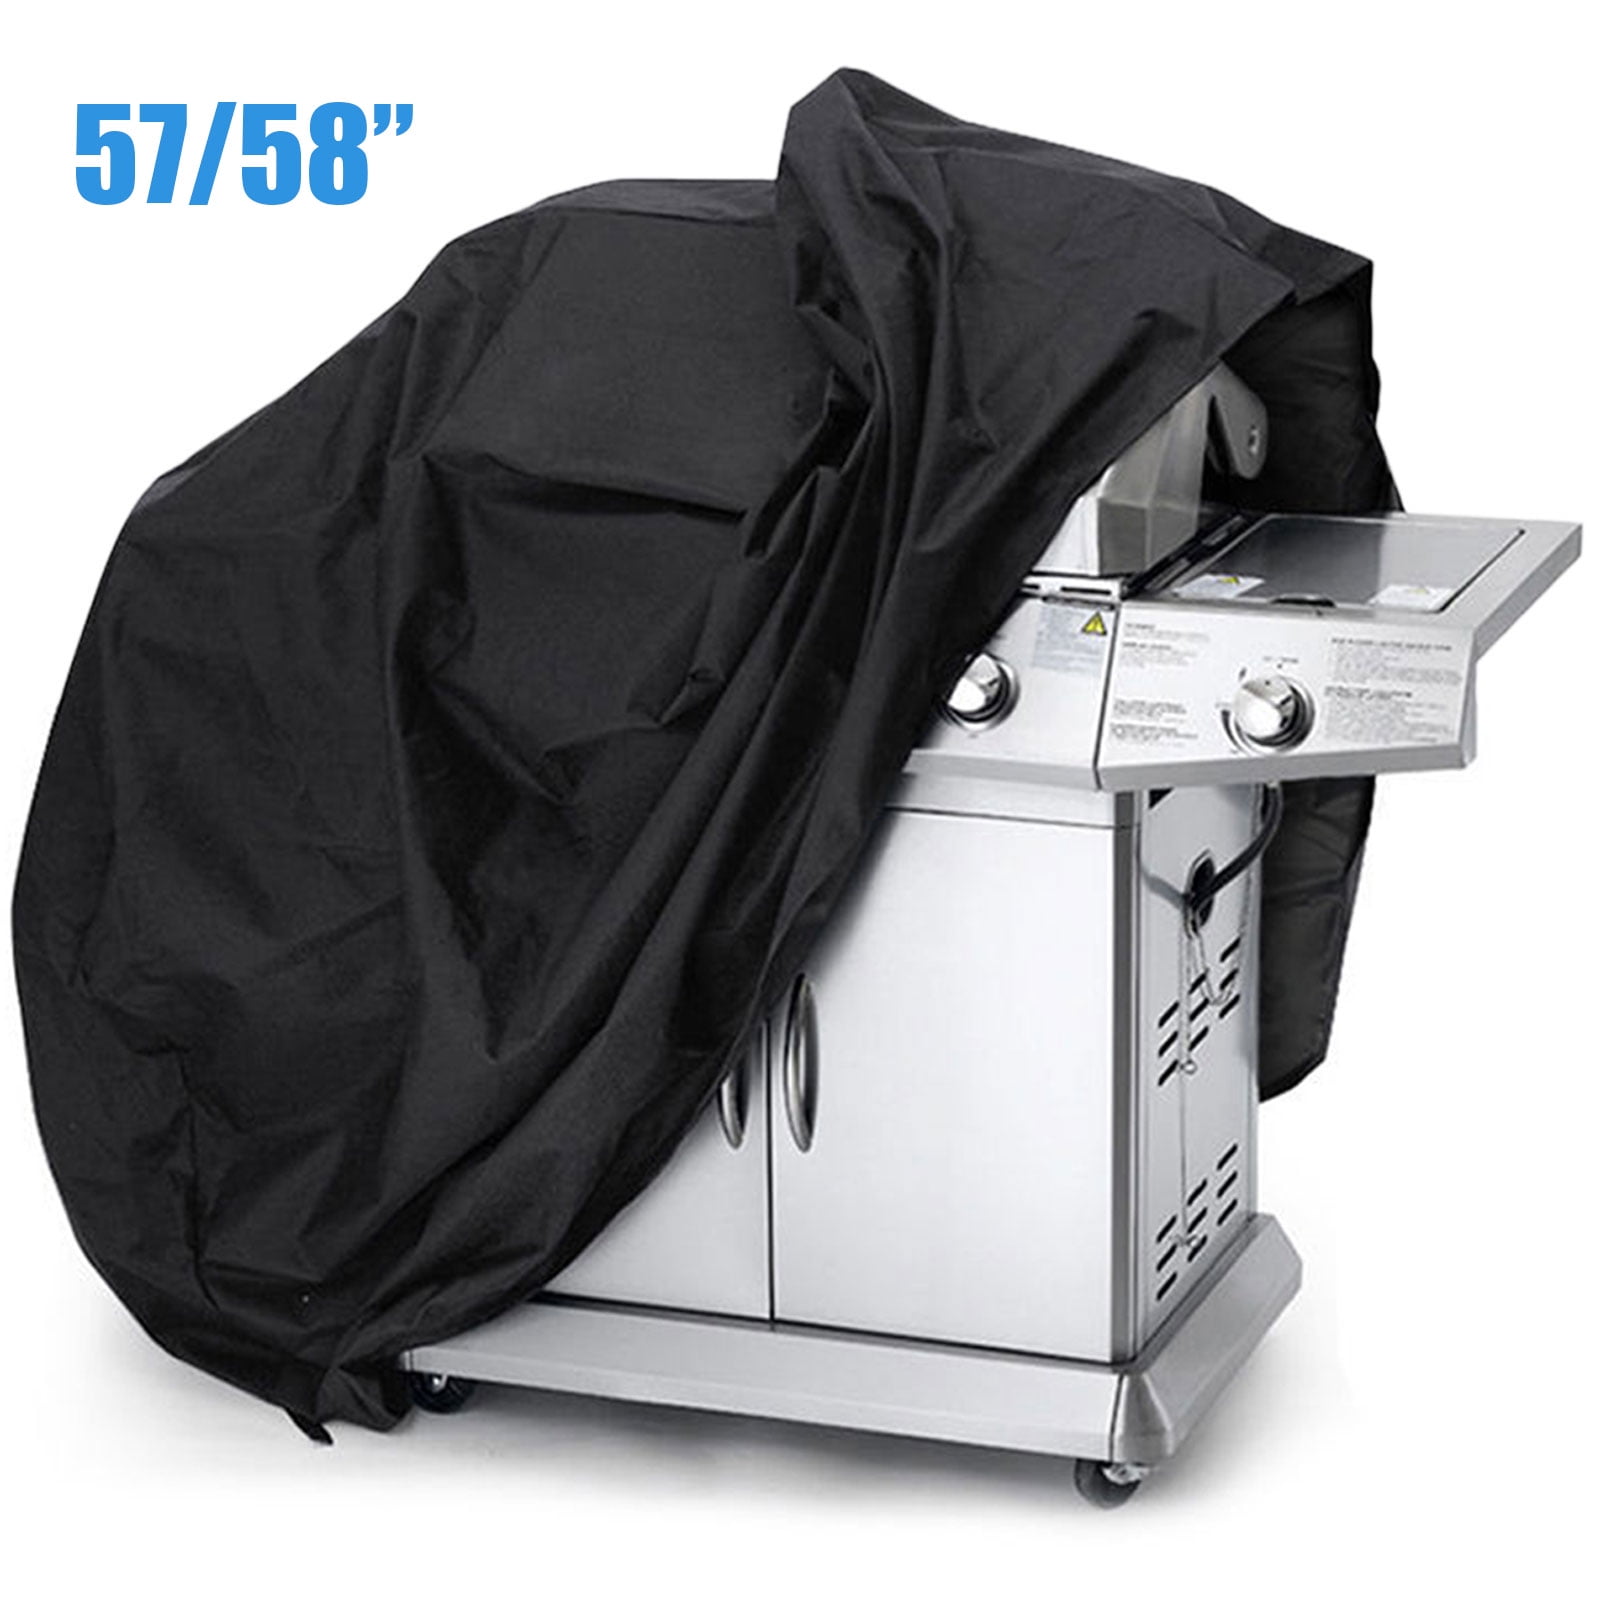 Universal Grill Cover Weatherproof Waterproof Protective BBQ Cover 